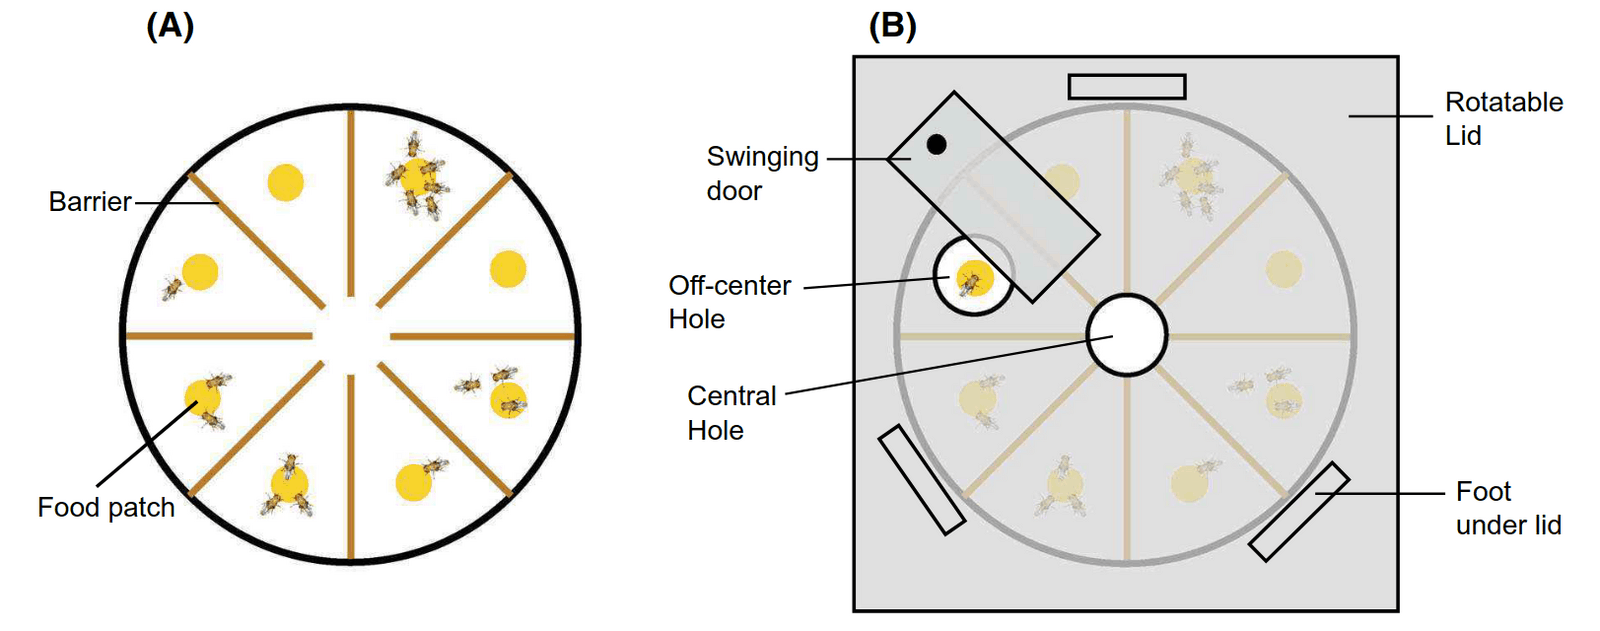 Figure 1: The arena used for quantification of and artificial selection on sociability. (A) The arena without the lid, showing the 8 compartments and an example arrangement of 16 flies. (B) The arena with the lid (note that the lid and swinging door were fully transparent, and opacity in the diagram is only for clarity). A foam plug at the central hole (not shown in the figure) allowed fly movement among the 8 compartments when at the top position, and locked flies within their compartment when in the bottom position.